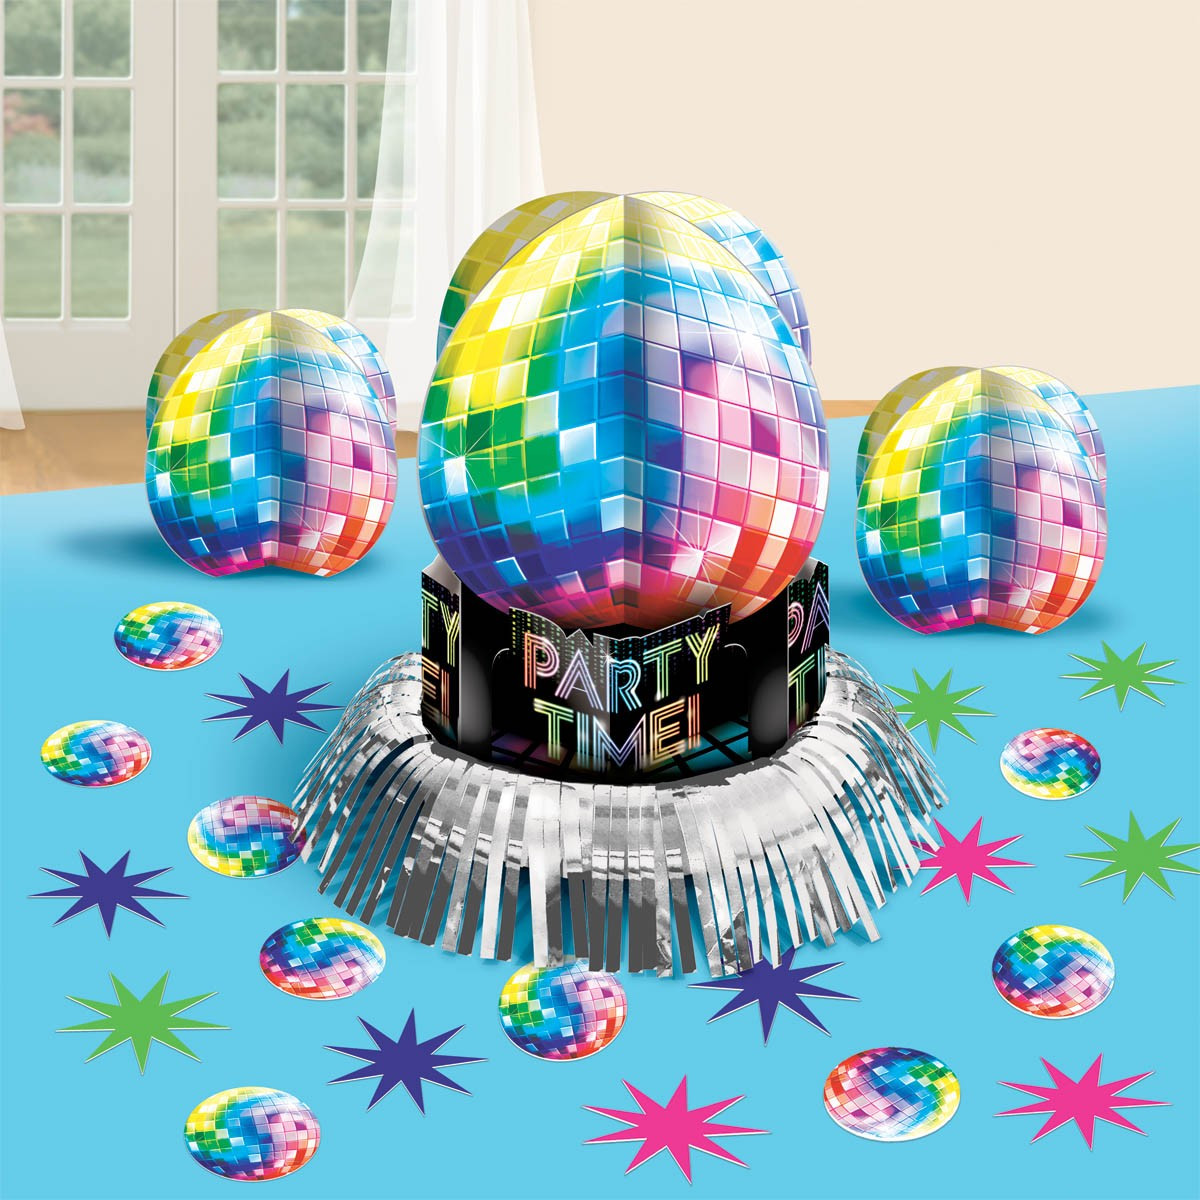 70'S Birthday Party Ideas
 DISCO FEVER 70 S BIRTHDAY PARTY TABLE DECORATING